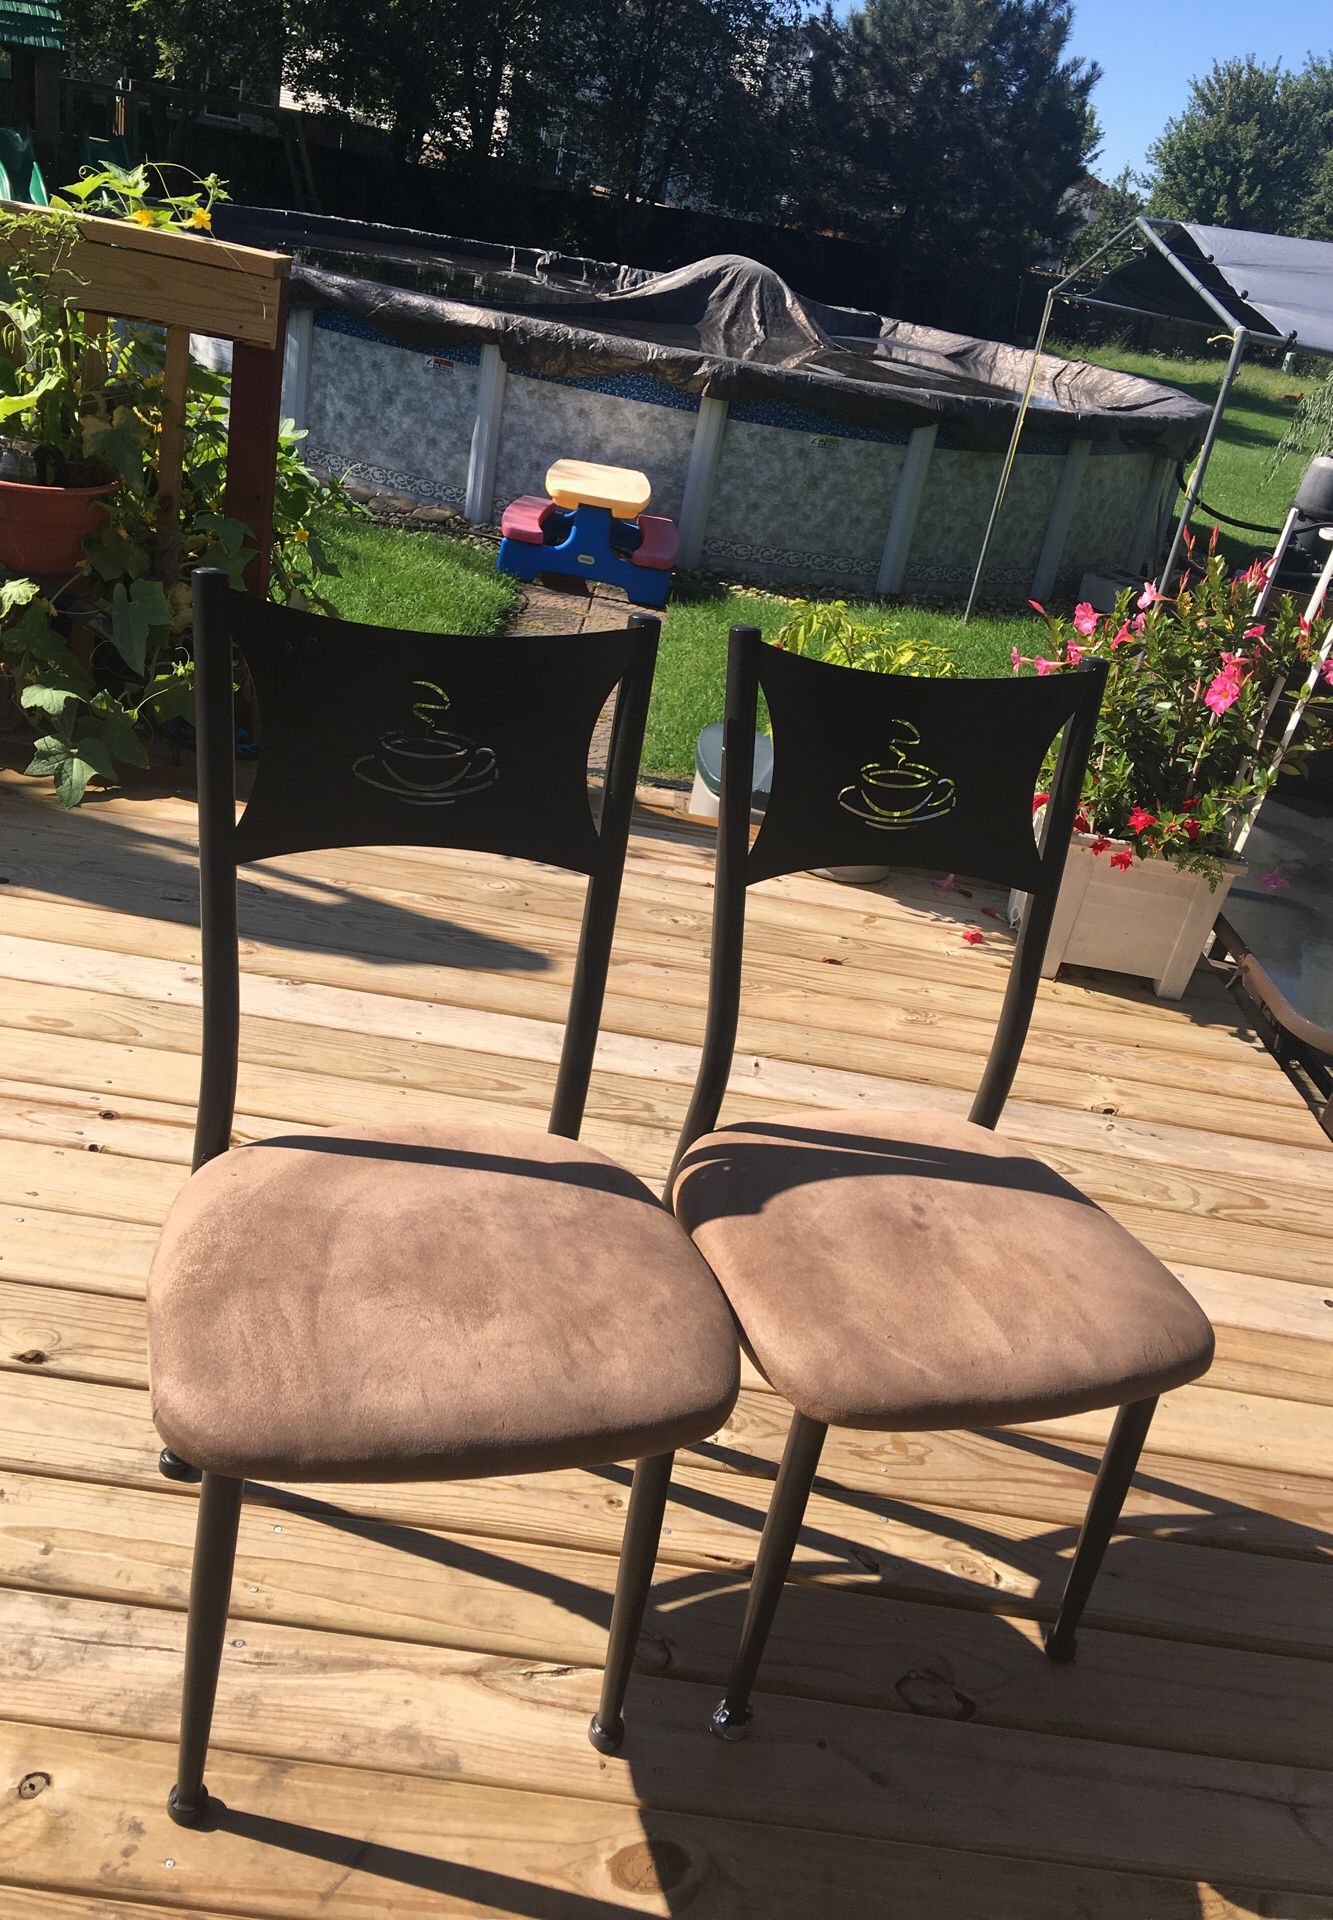 4 chairs for sale just the chairs